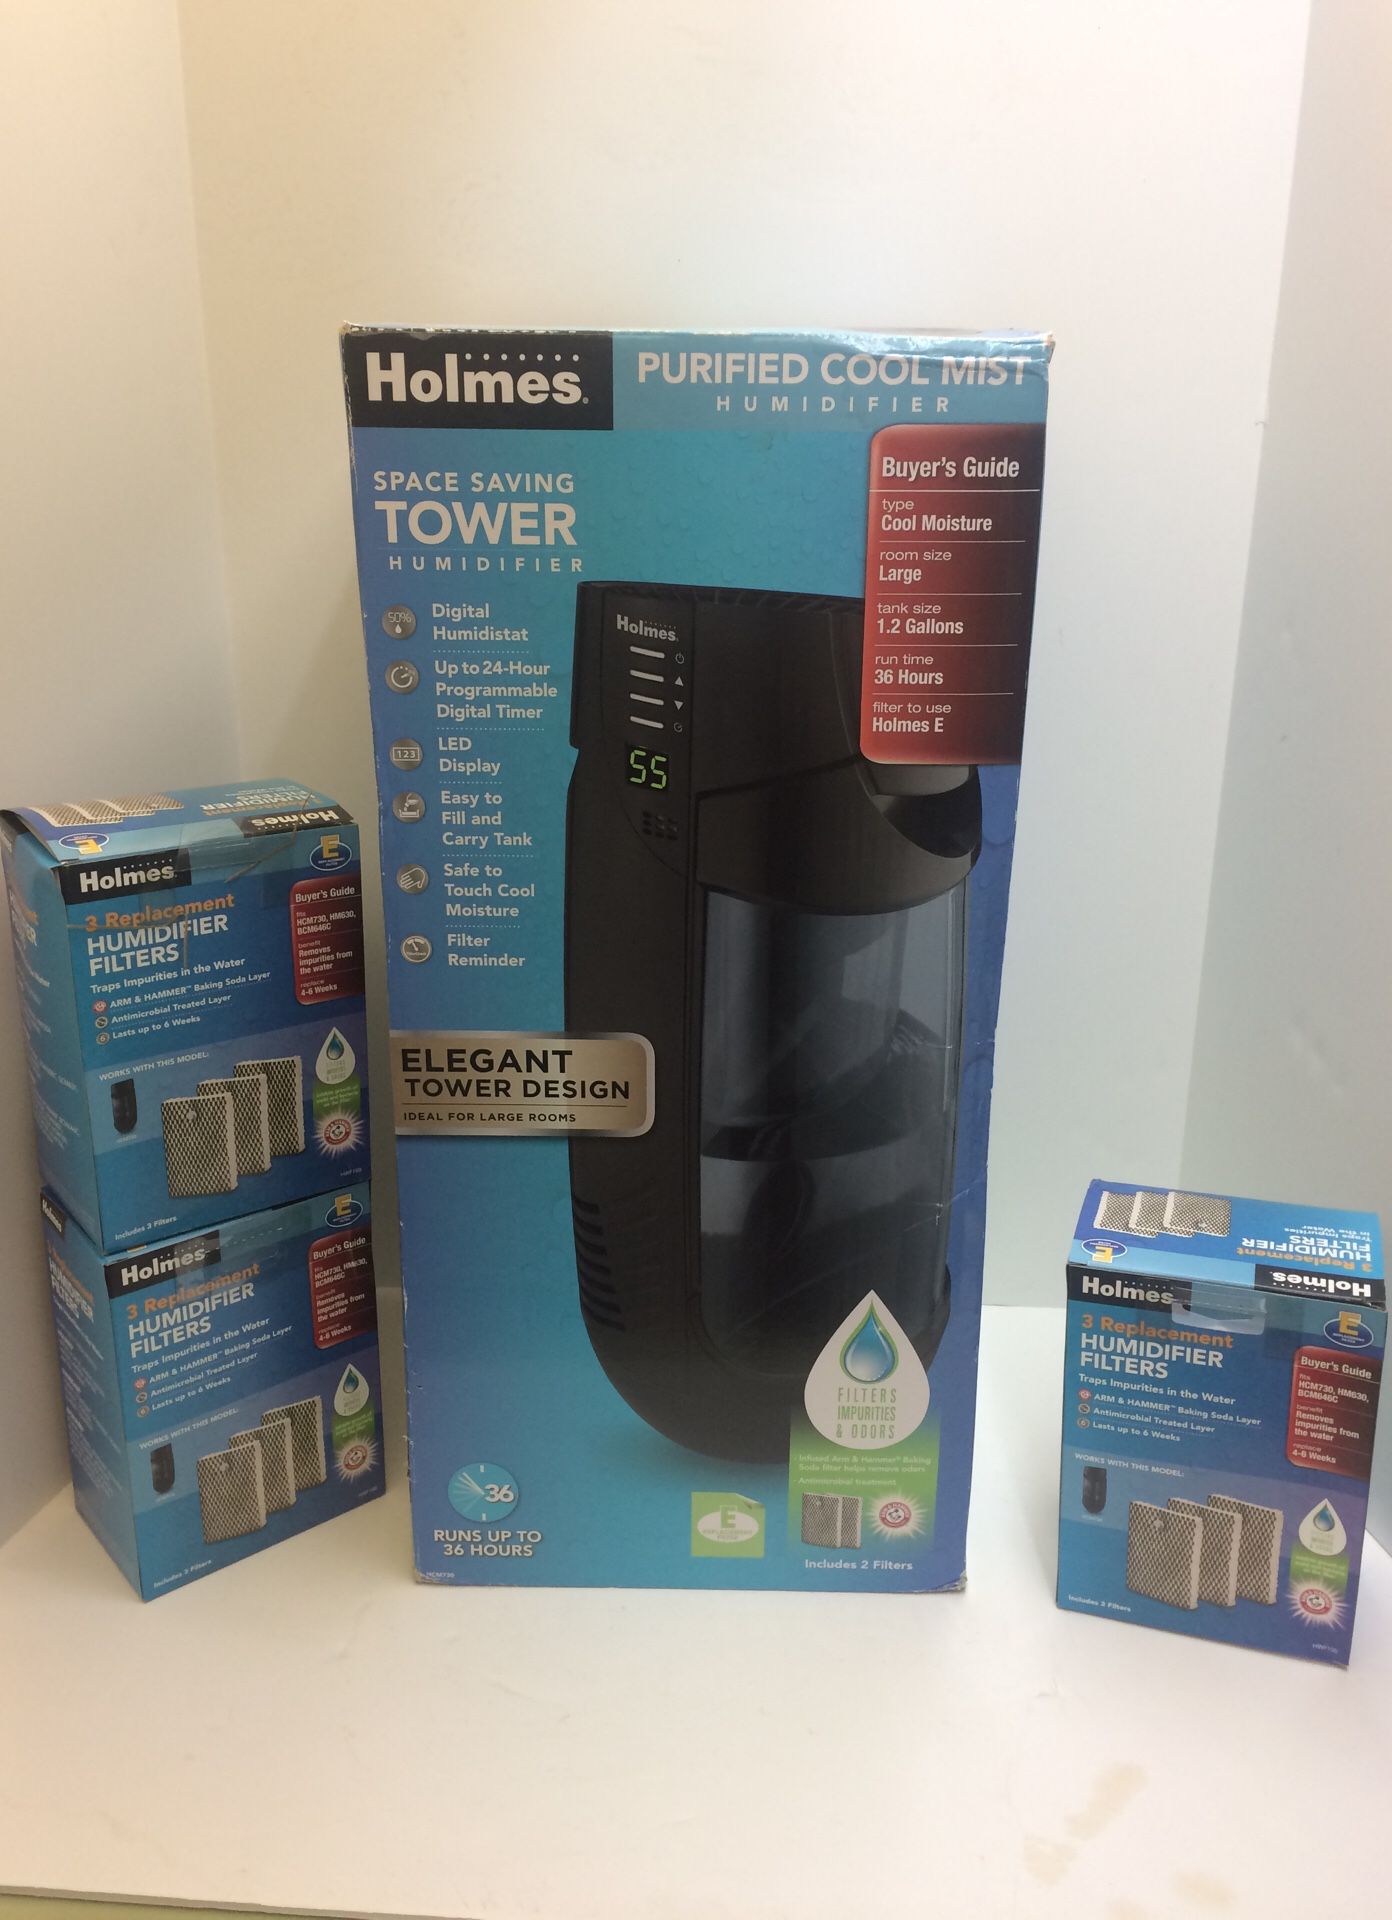 Holmes purified cool mist humidifier Tower model new in the box